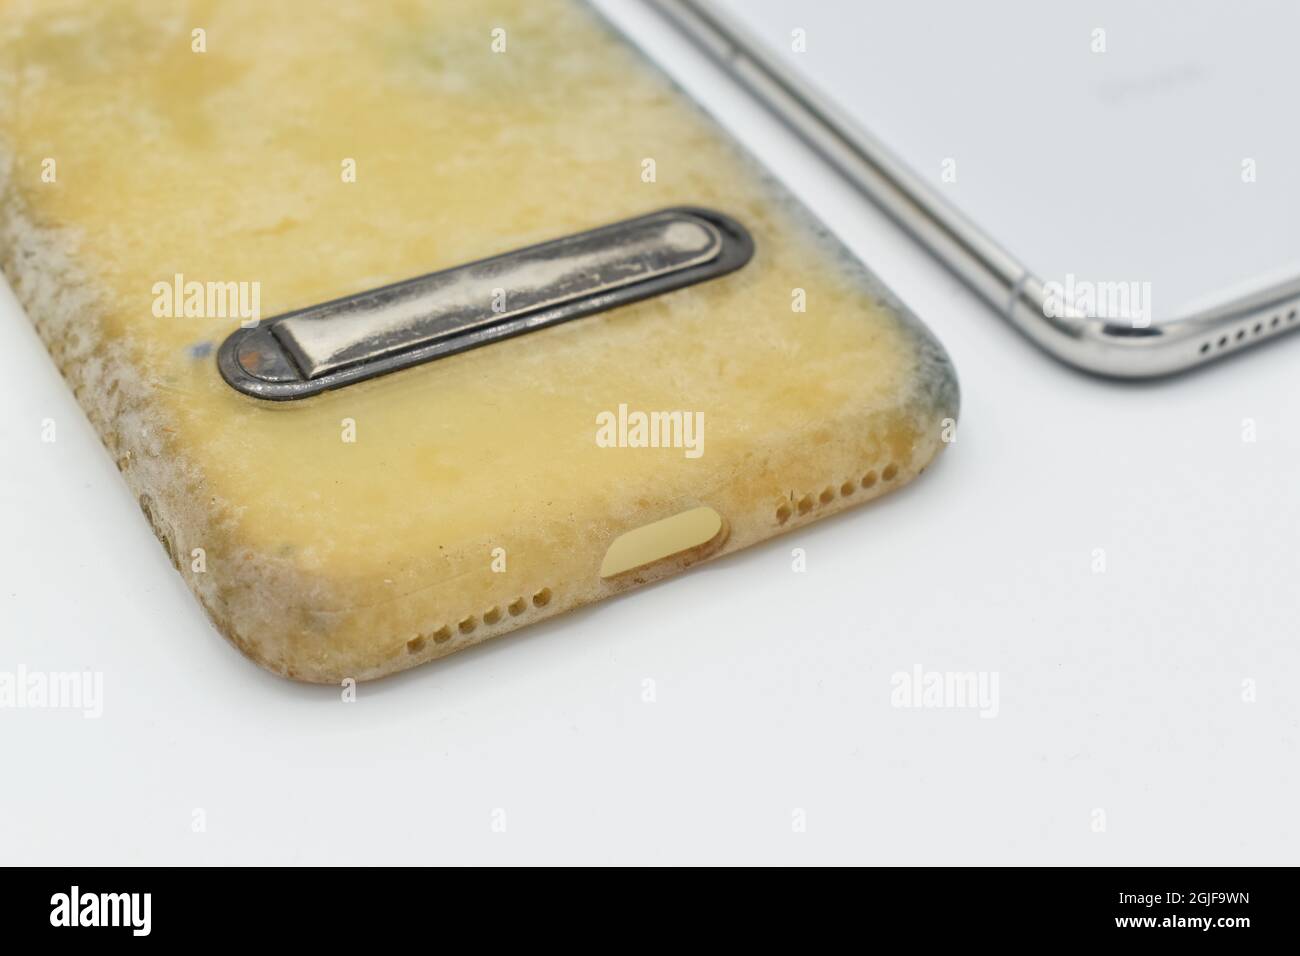 Old and dirty silicon phone case due to yellow stains and mold. Isolated on white background. Closeup view. Stock Photo